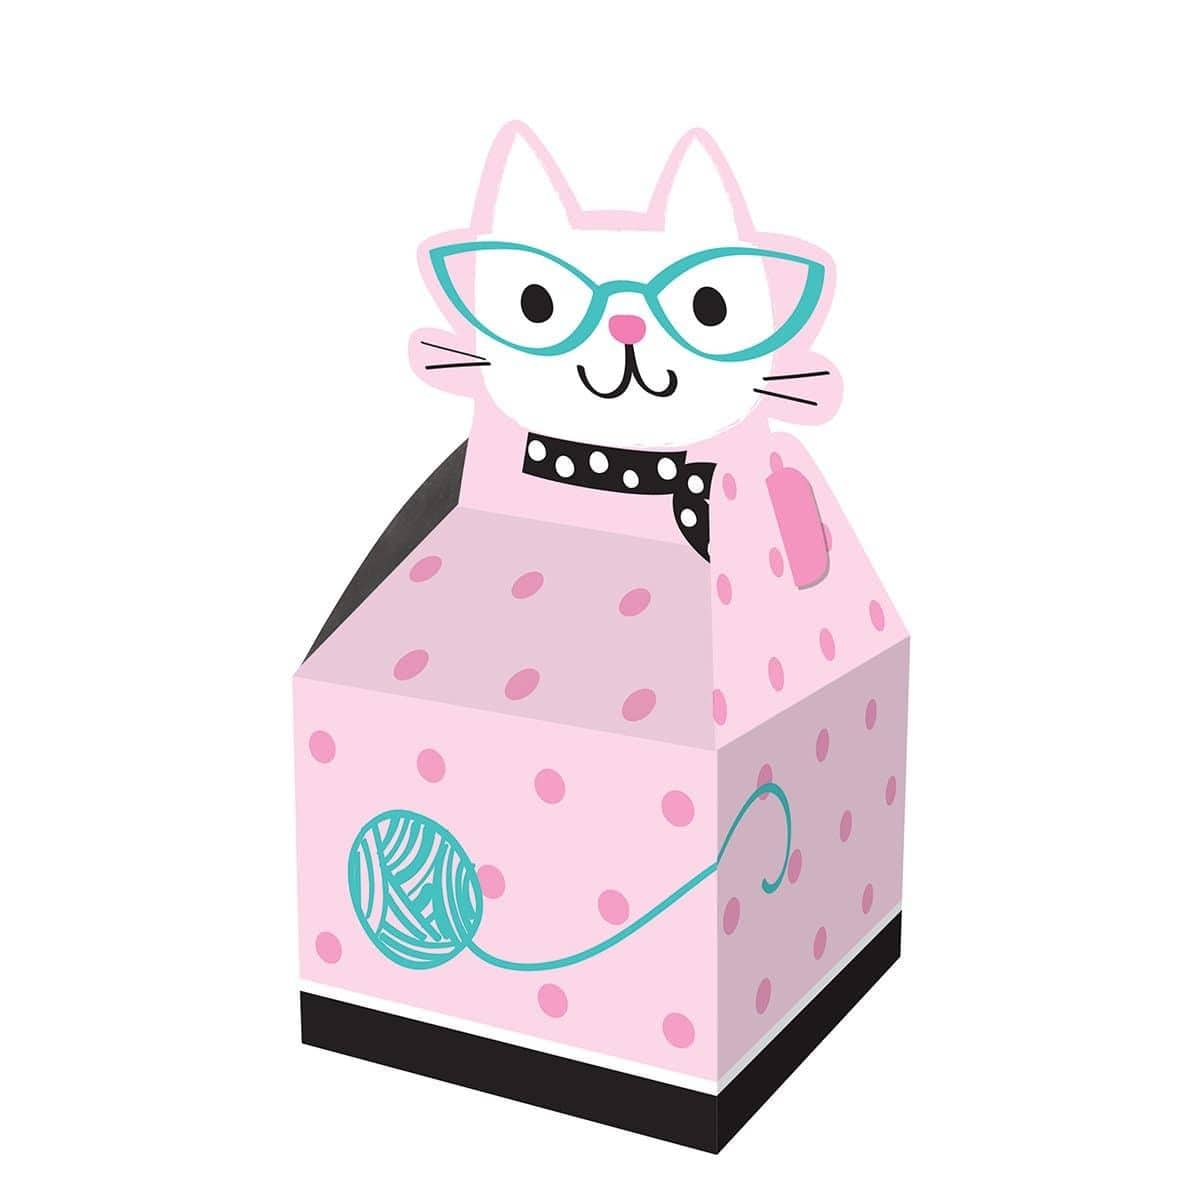 Buy Kids Birthday Purr-fect Party favor boxes, 8 per package sold at Party Expert